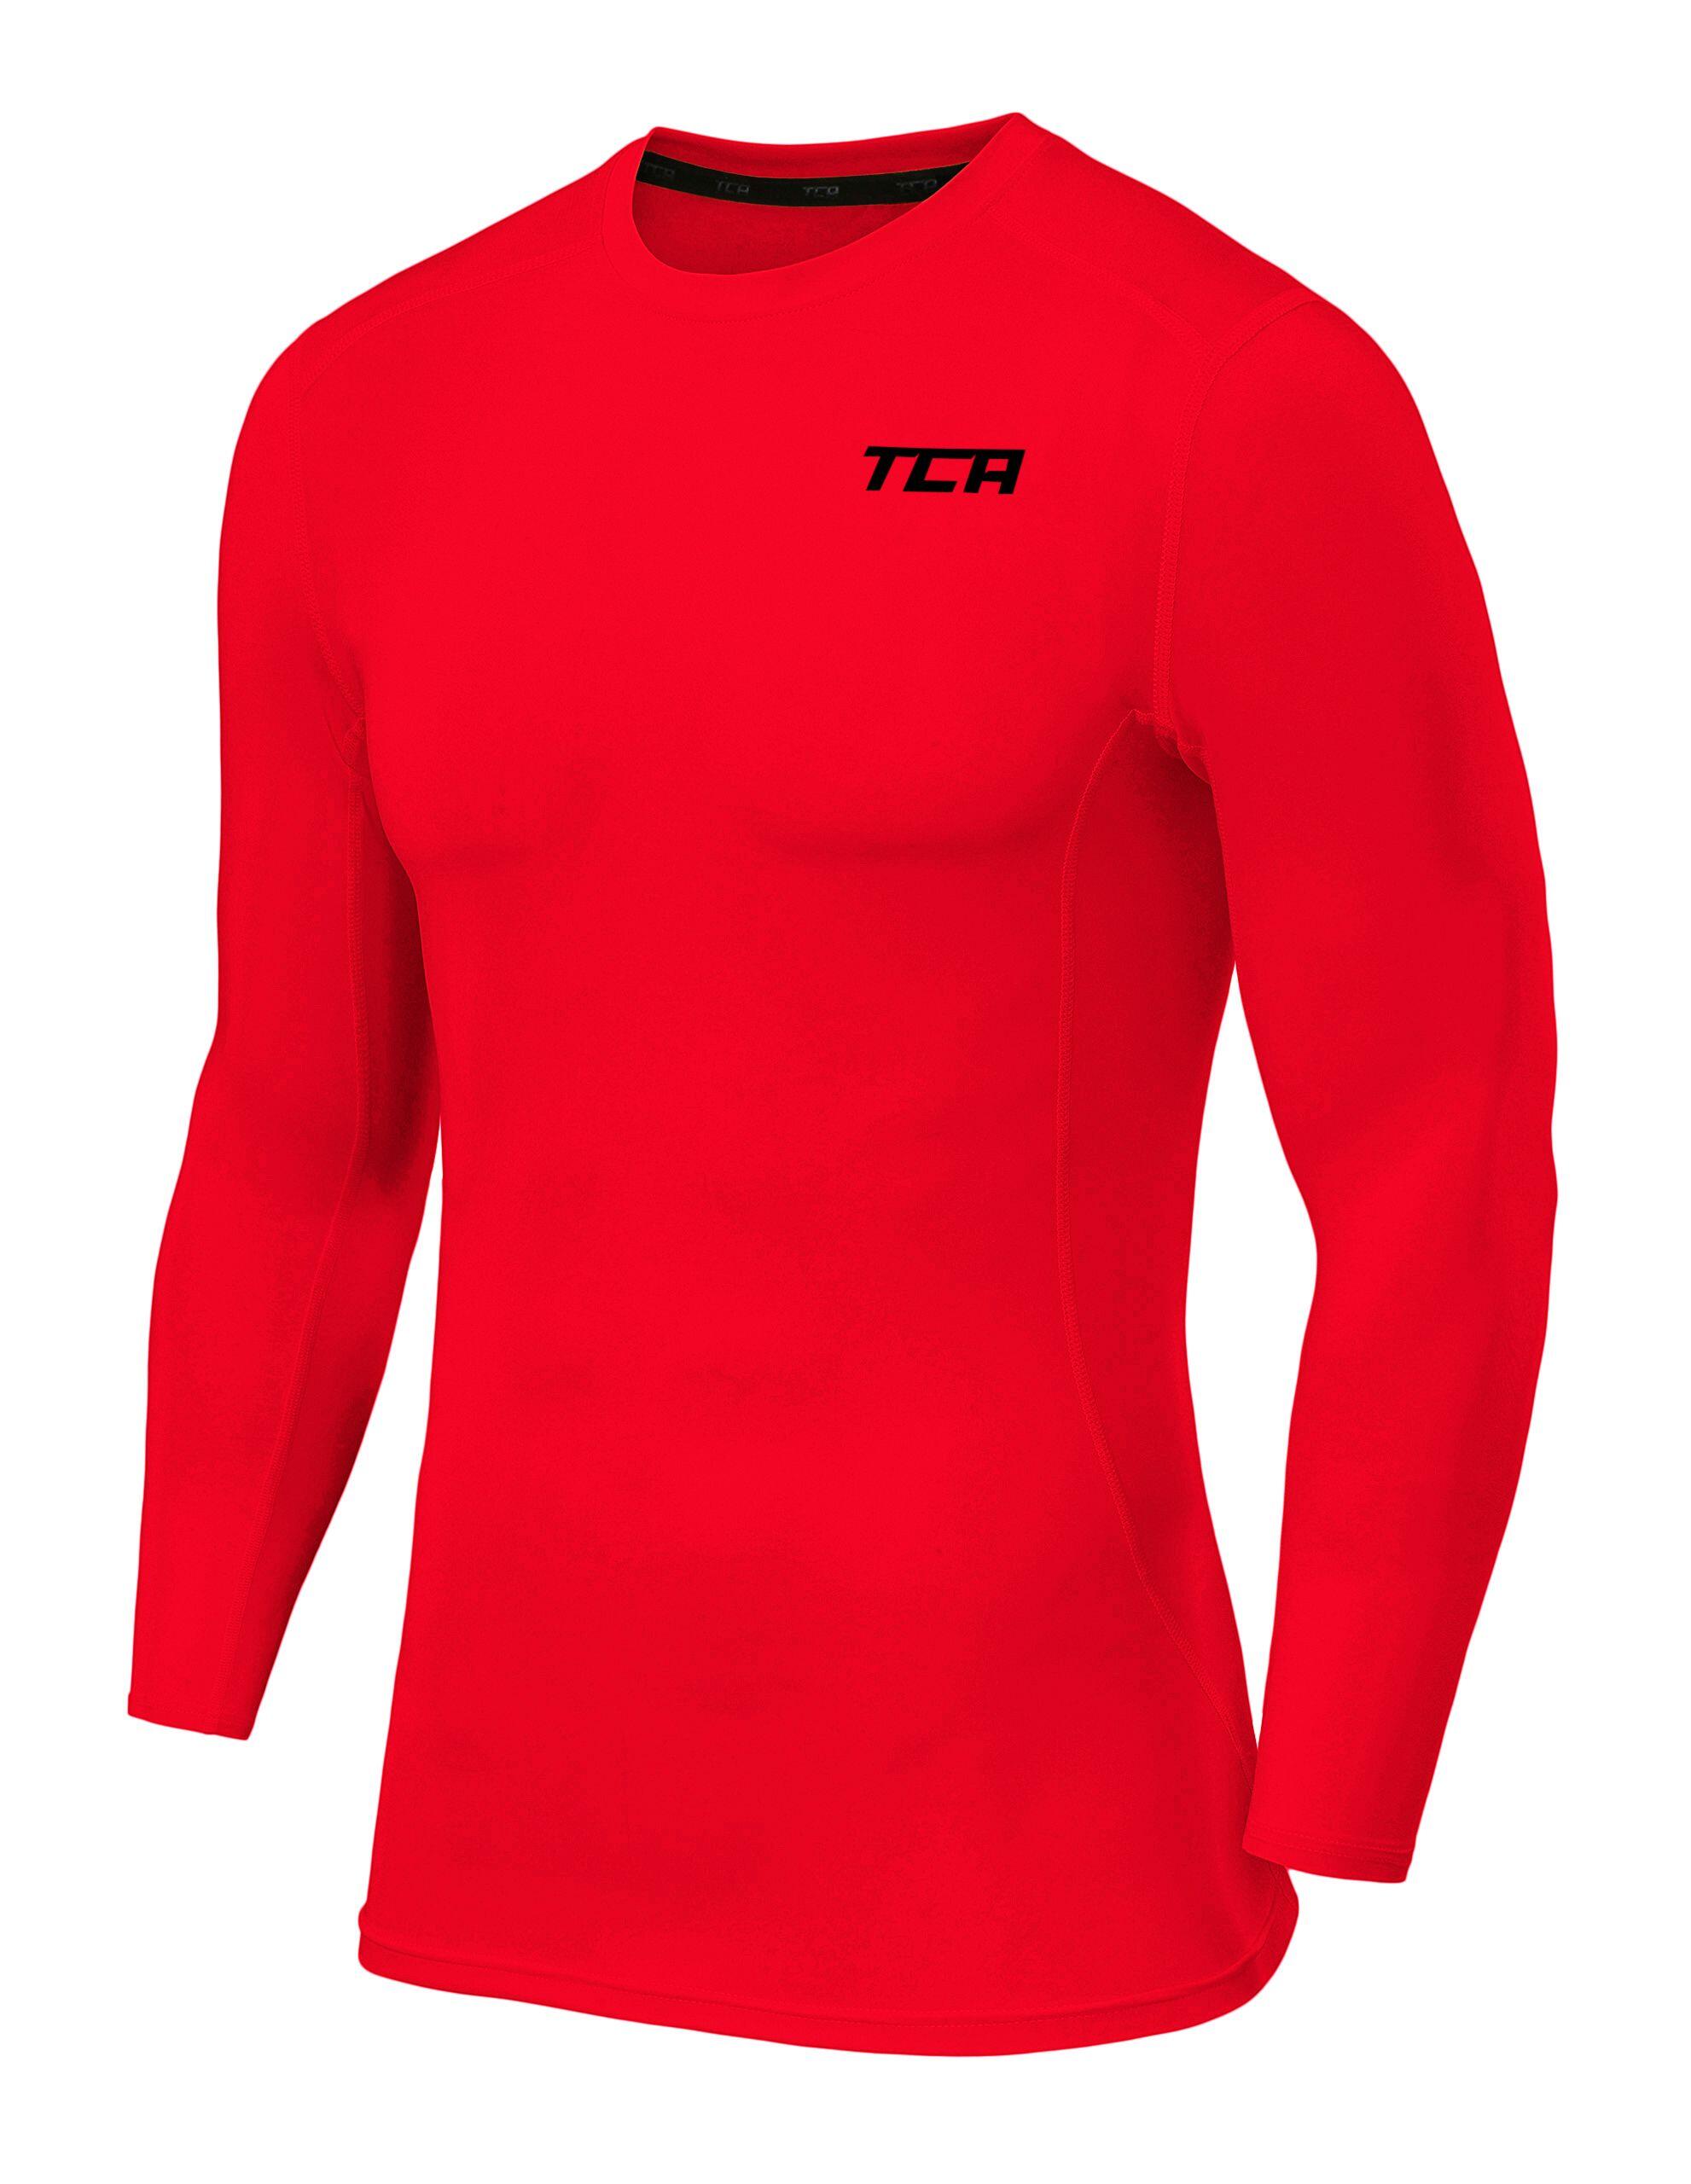 TCA Men's Power Base Layer Compression Long Sleeve Top - High Risk Red